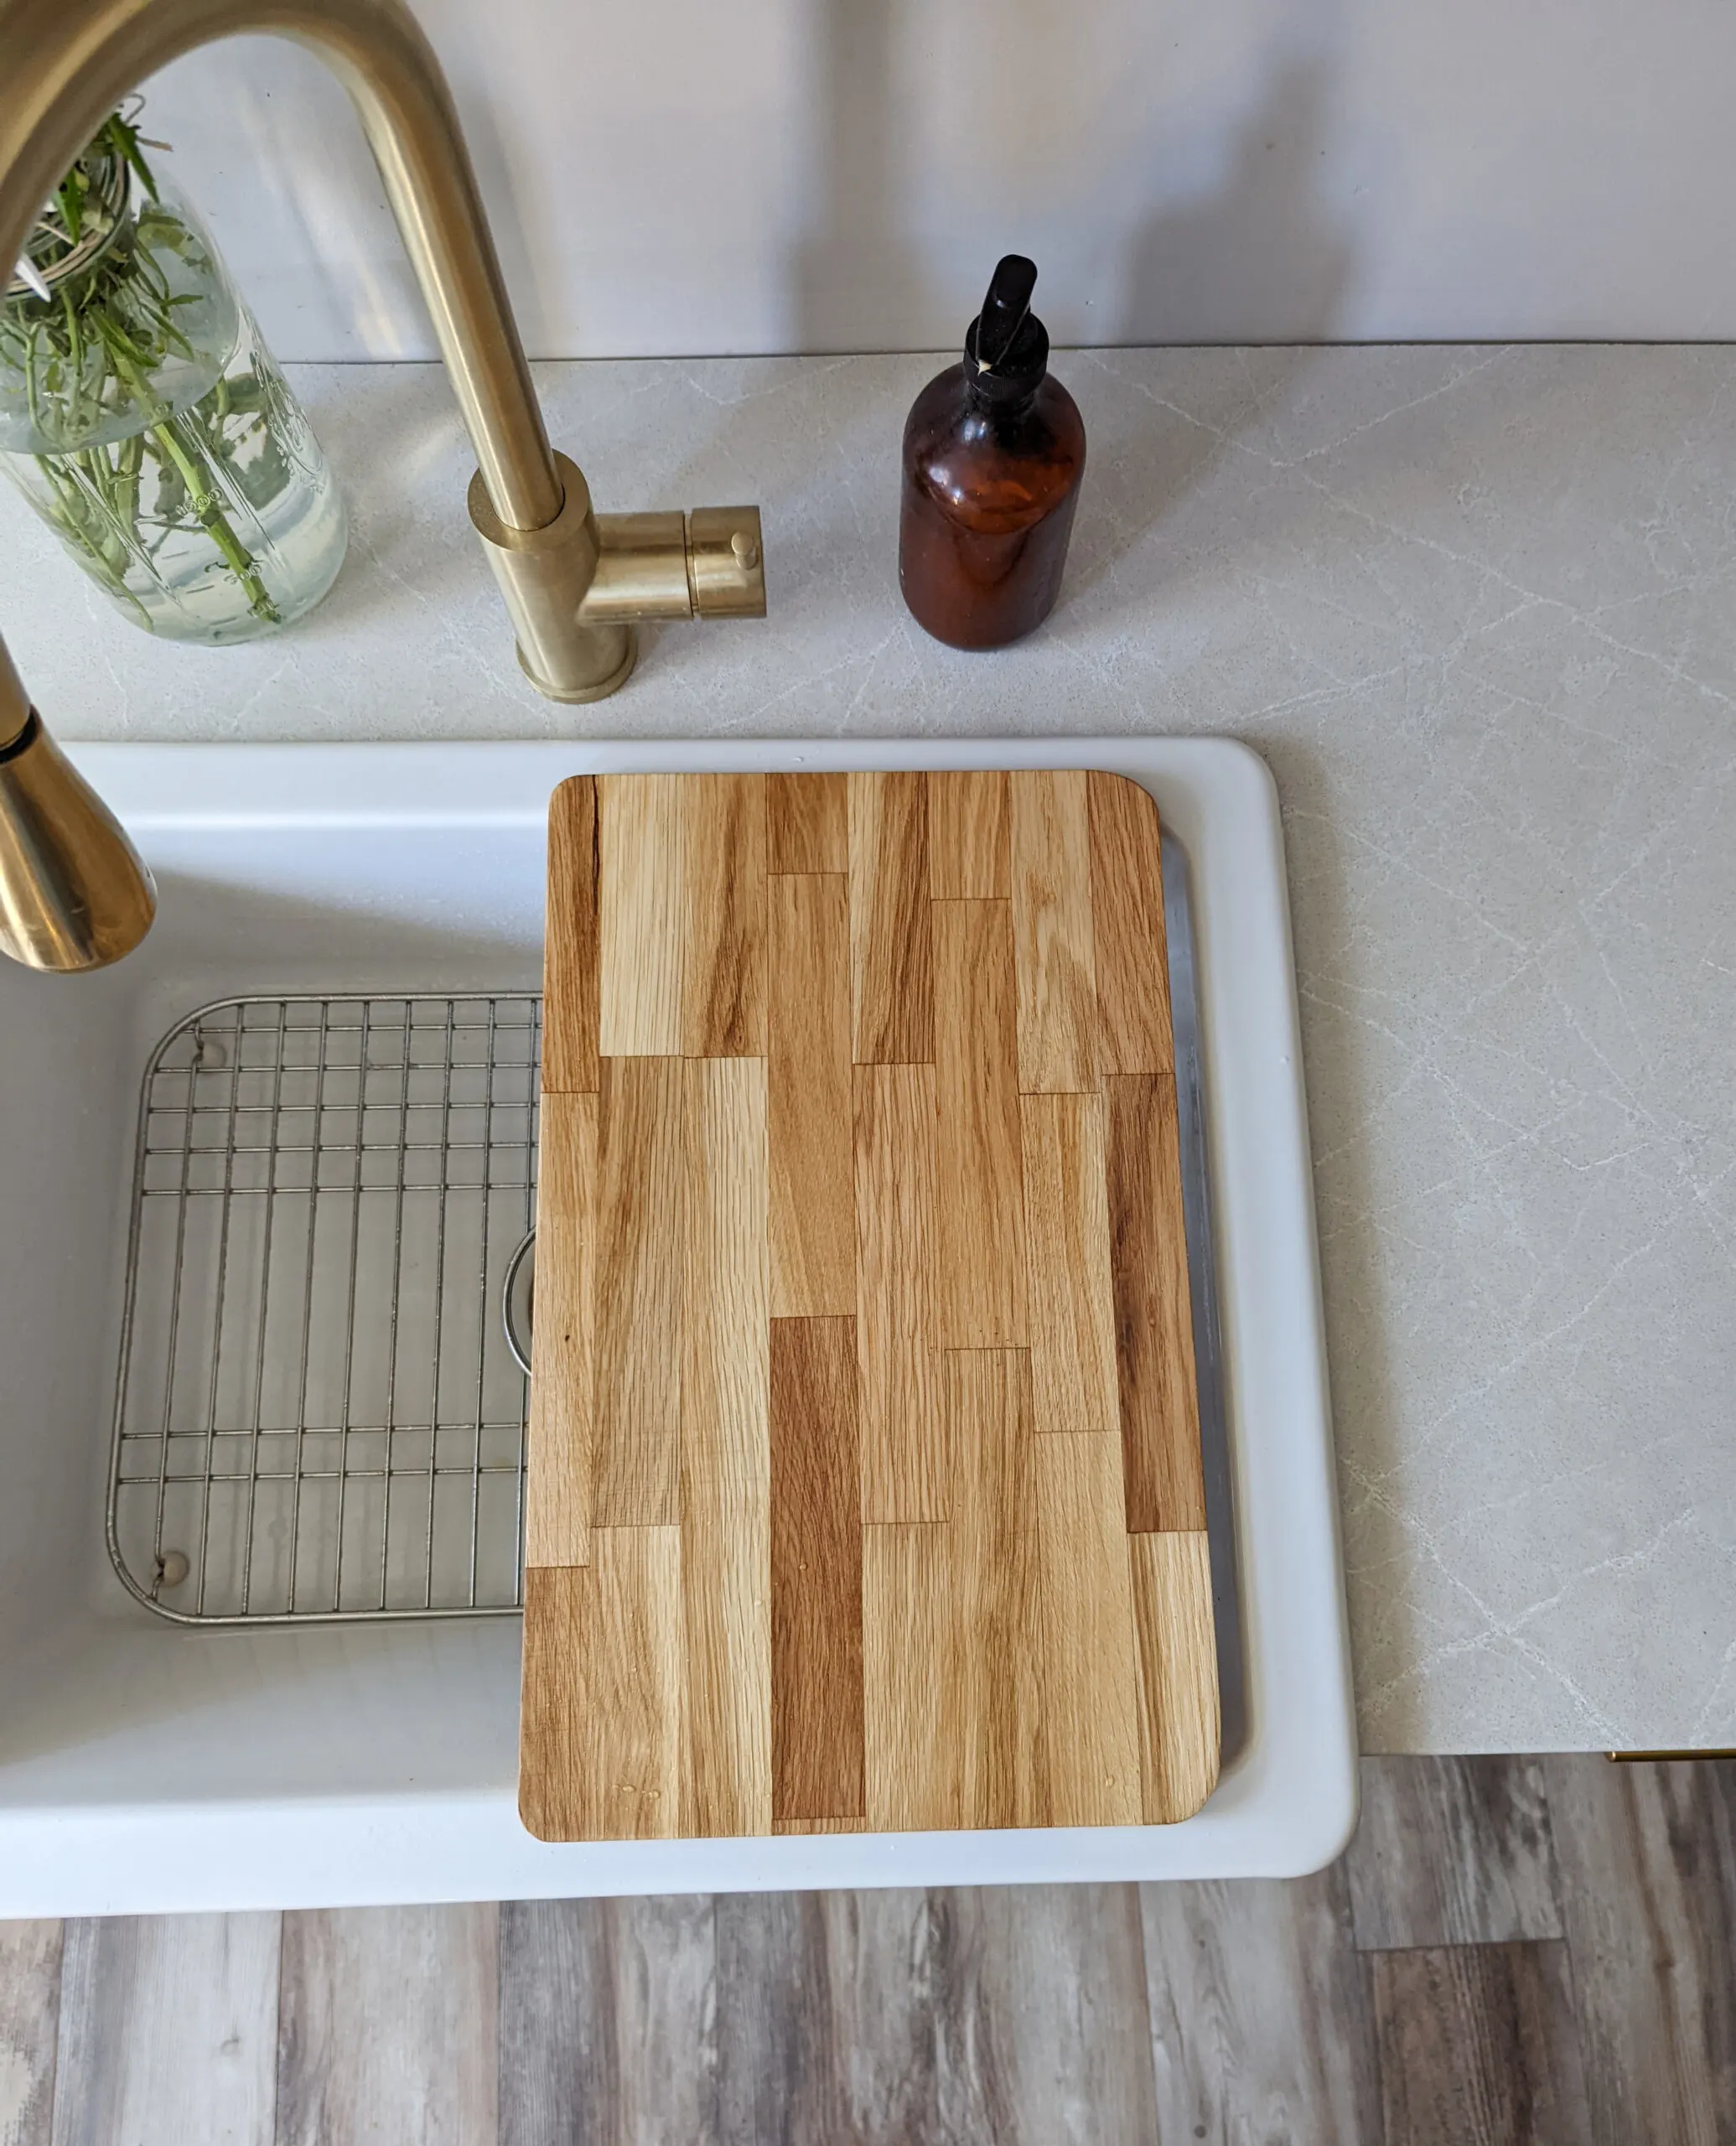 Ikeas NORRSJÖN cutting board, cut down in a hobby woodshop to cover only half of the sink.